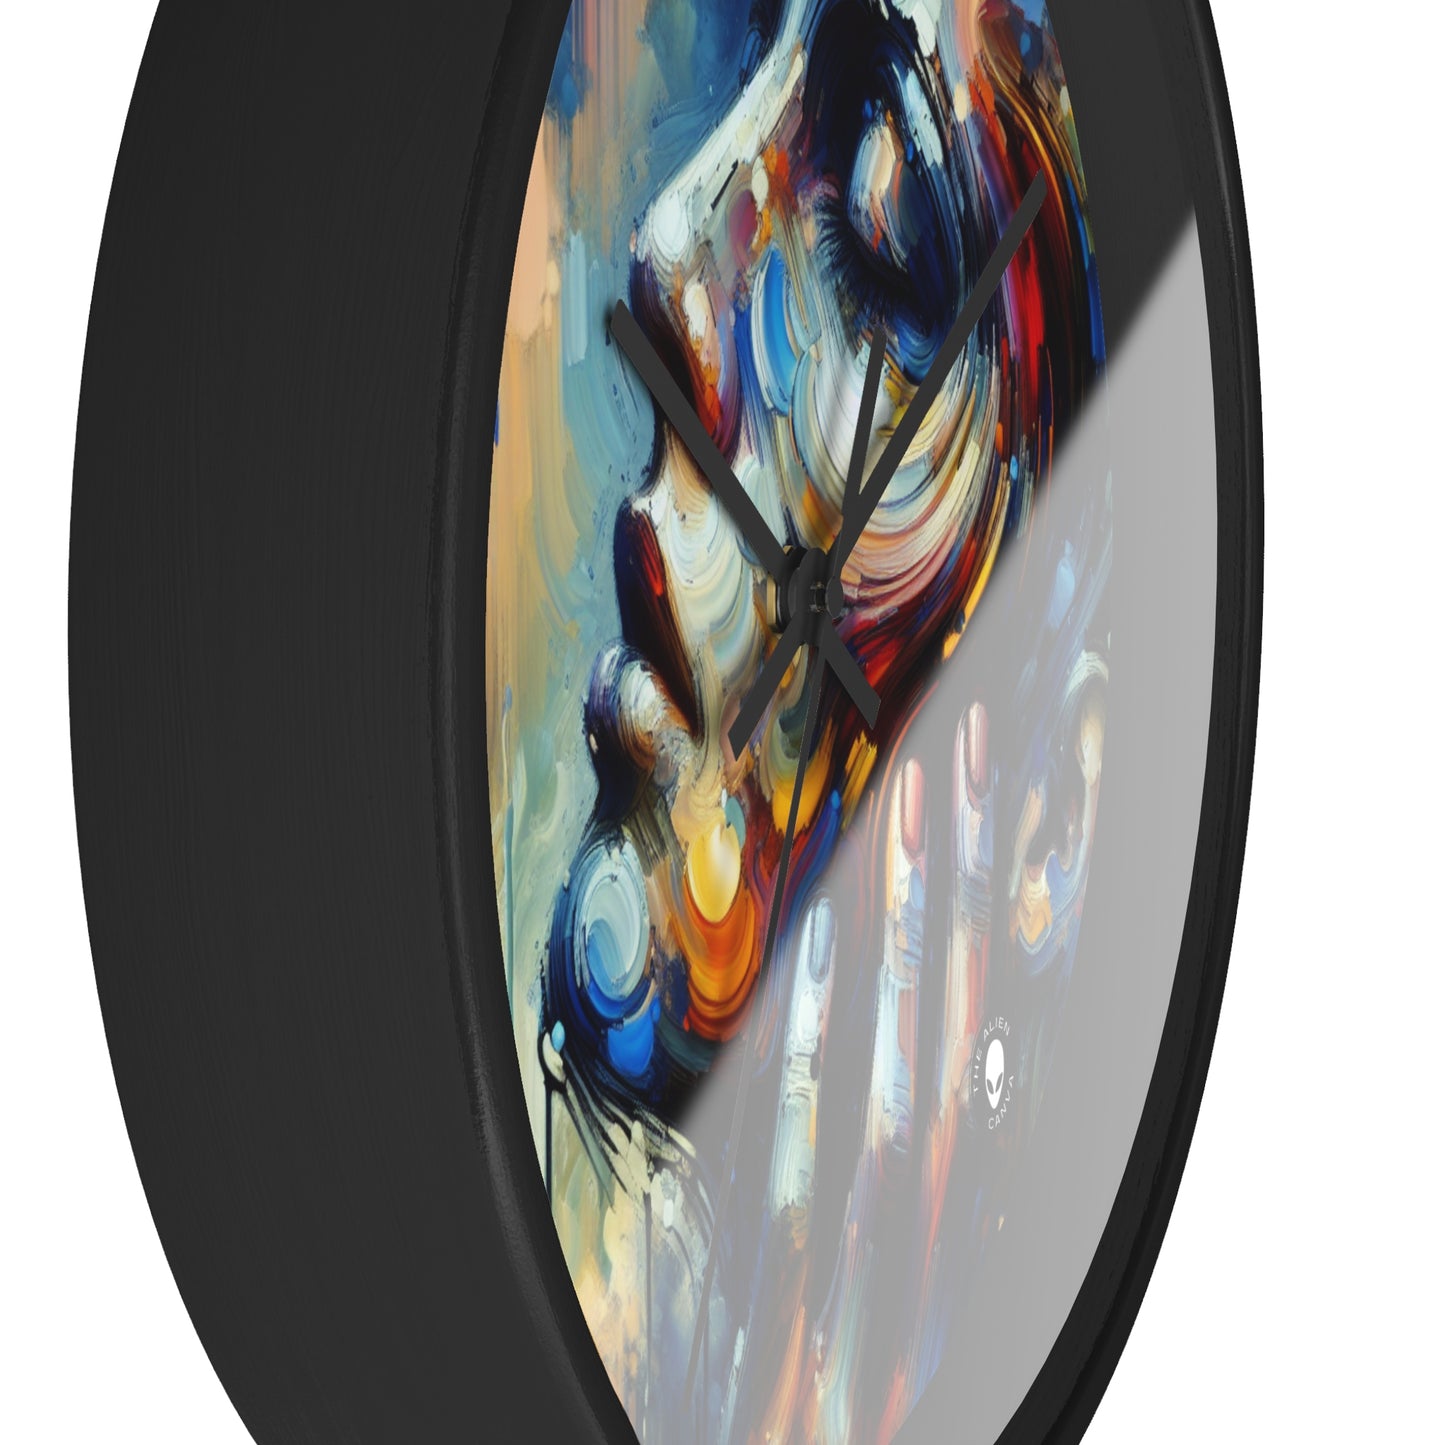 "City Lights: A Neo-Expressionist Ode to Urban Chaos" - The Alien Wall Clock Neo-Expressionism